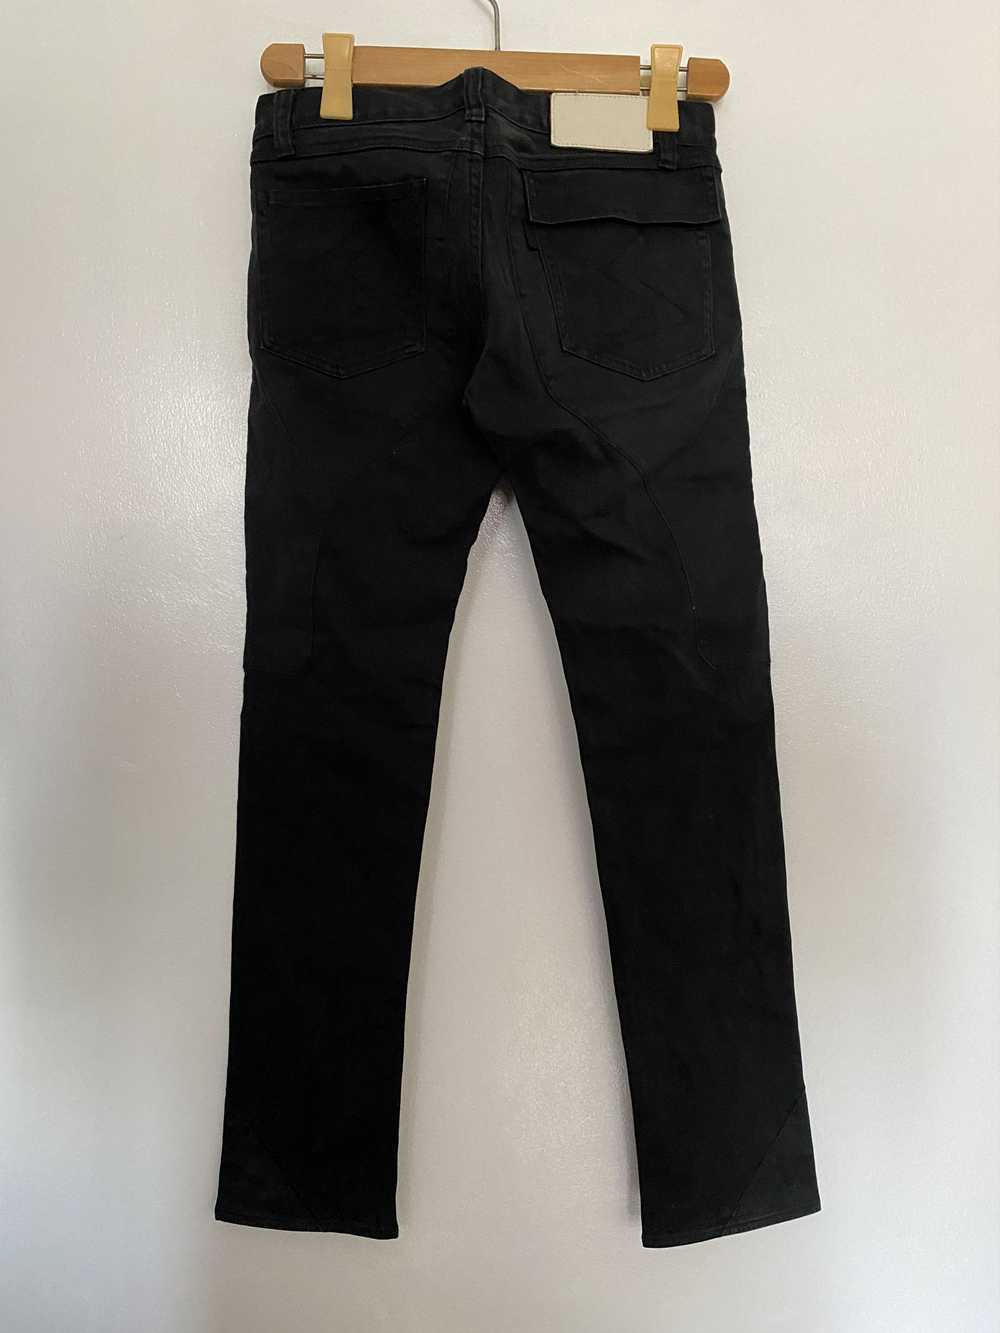 Undercover SS09 Neoboy Pants - image 10